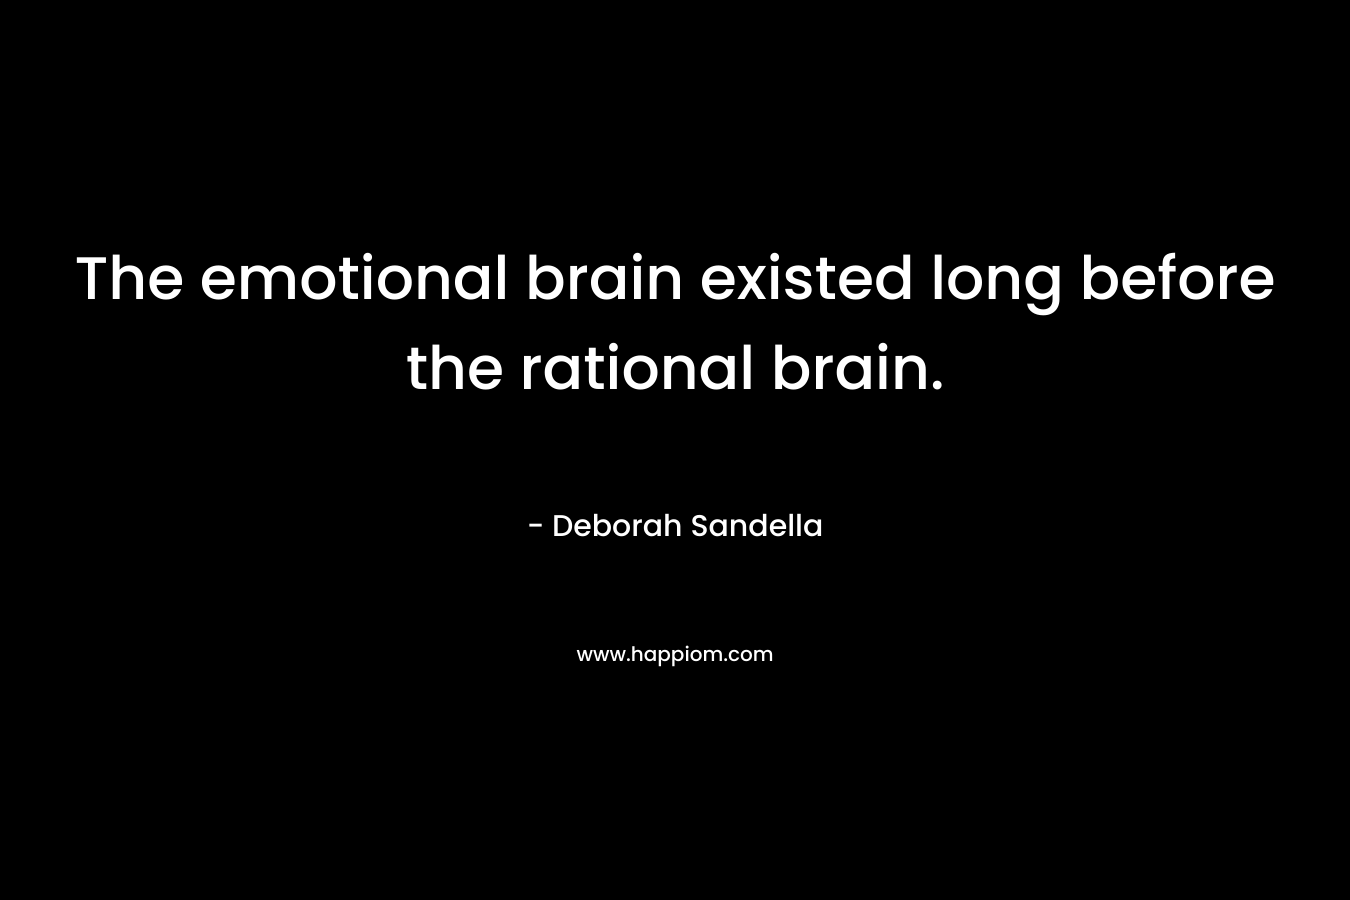 The emotional brain existed long before the rational brain.